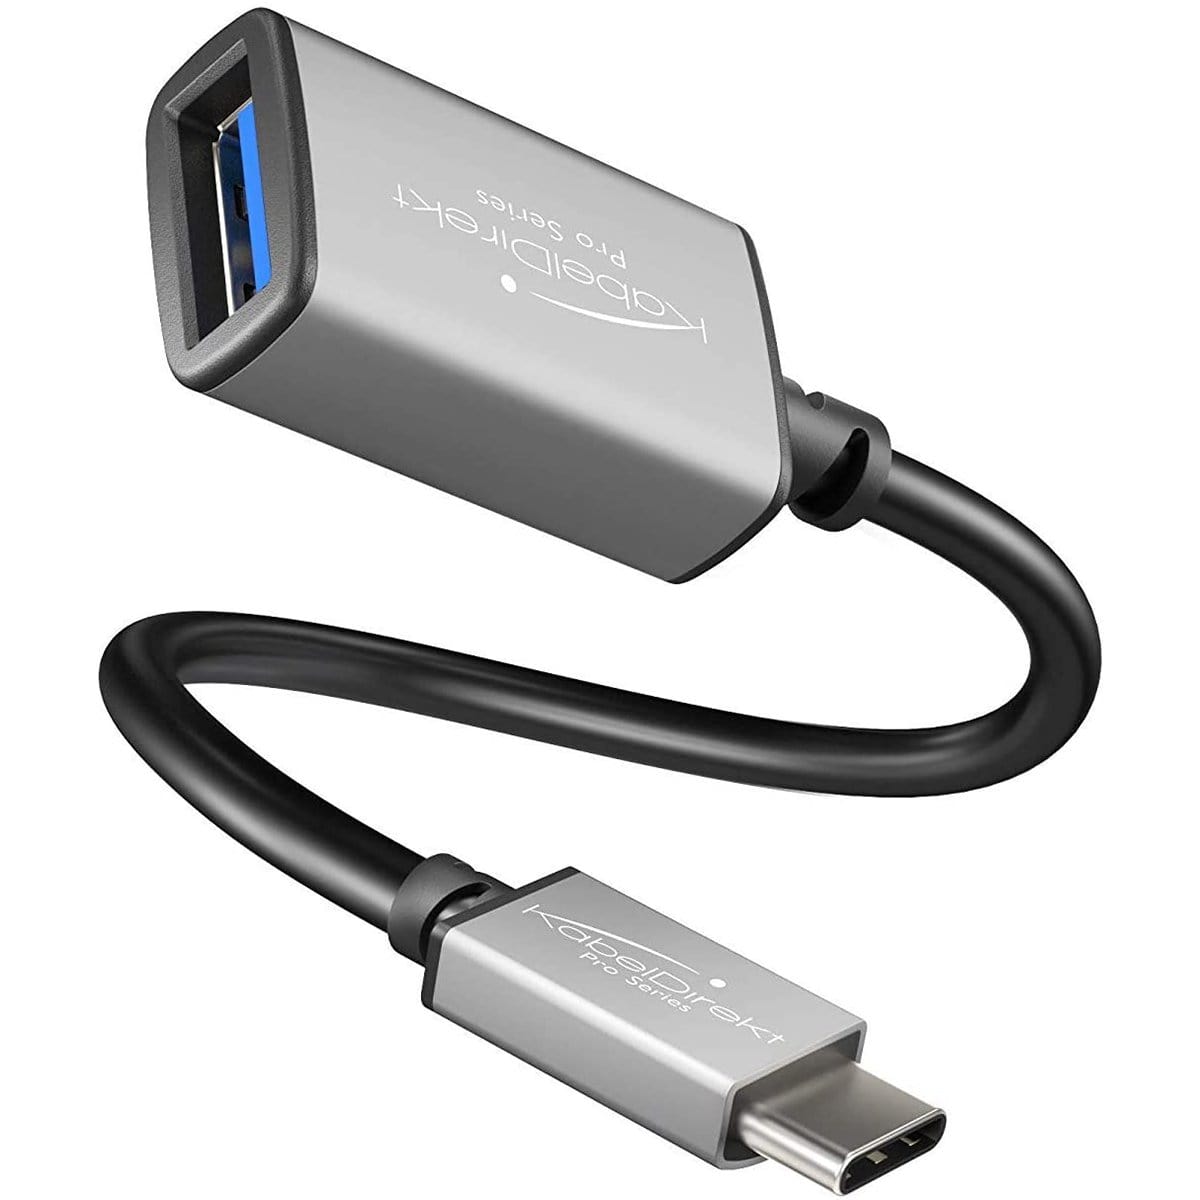 USB-C OTG Adapter - For connecting USB devices to smartphones, tablets and notebooks with USB-C connection